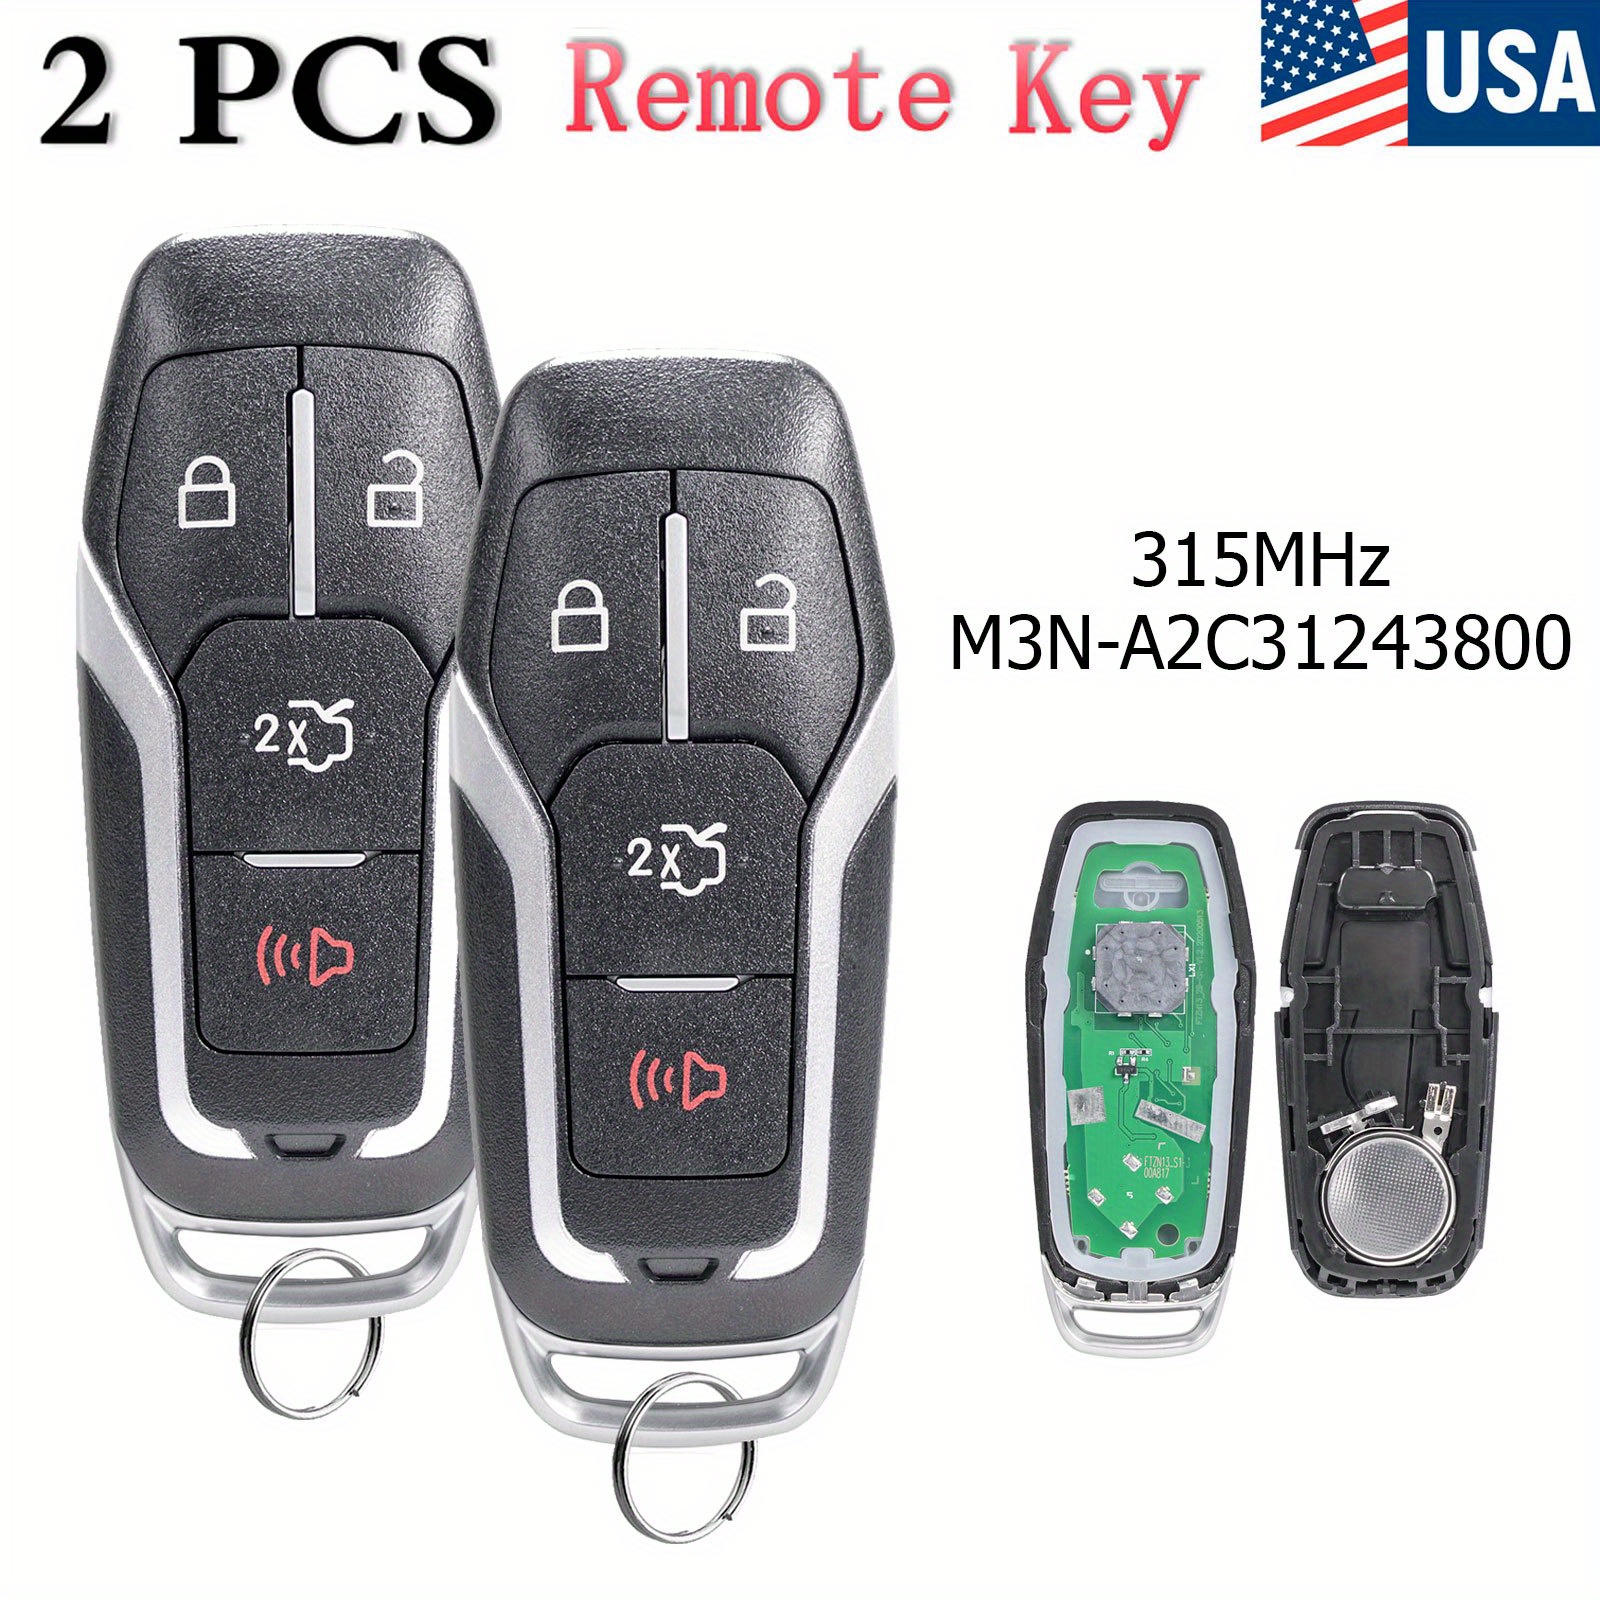 

2pcs Remote Car Key Fob 4 Buttons For Ford For Edge For Explorer For Mustang Fit Fcc Id M3n-a2c31243800